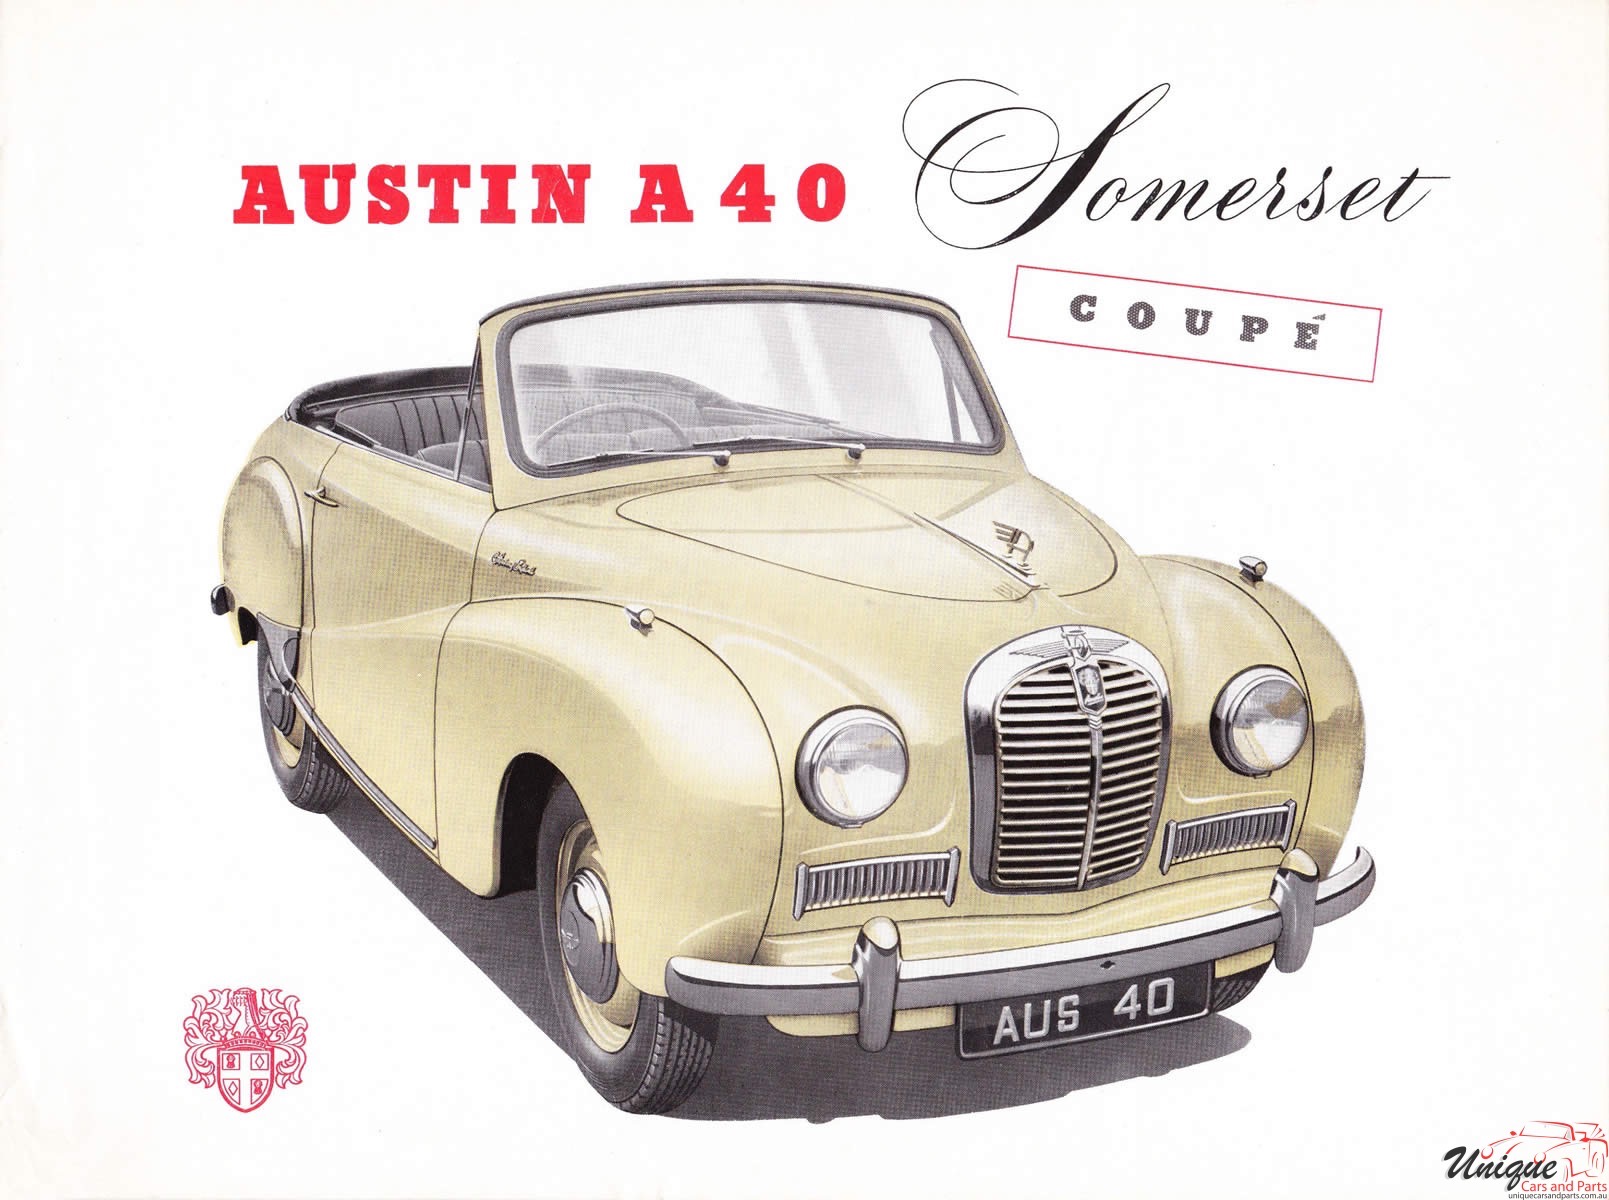 1950 Austin A40 Somerset Coupe Brochure Page 3